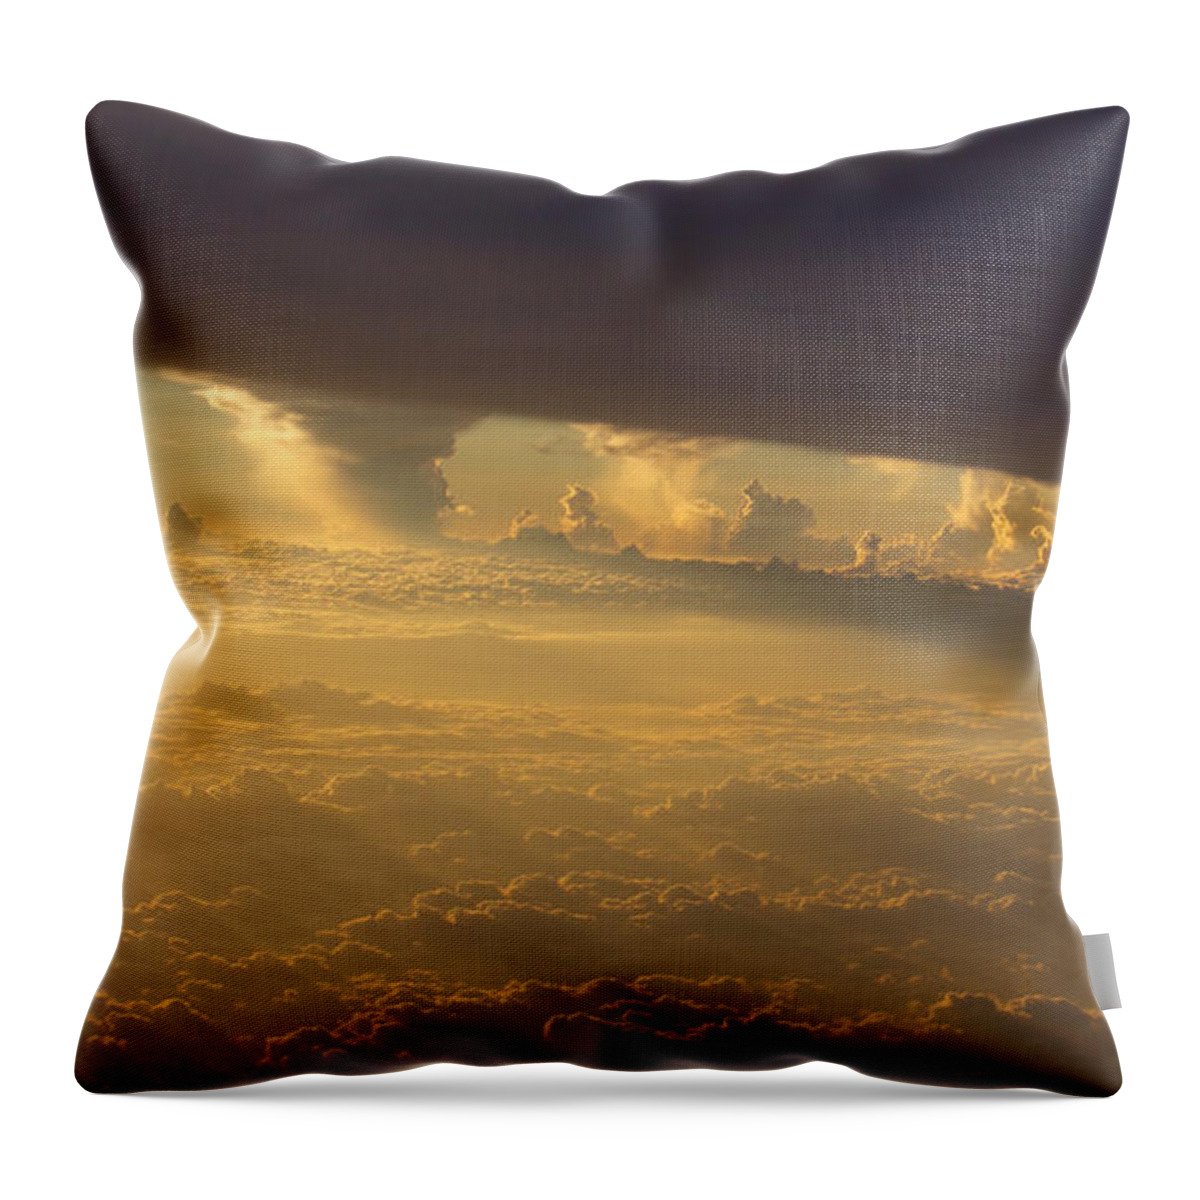 Clouds Throw Pillow featuring the photograph Summer Clouds by Brooke Bowdren